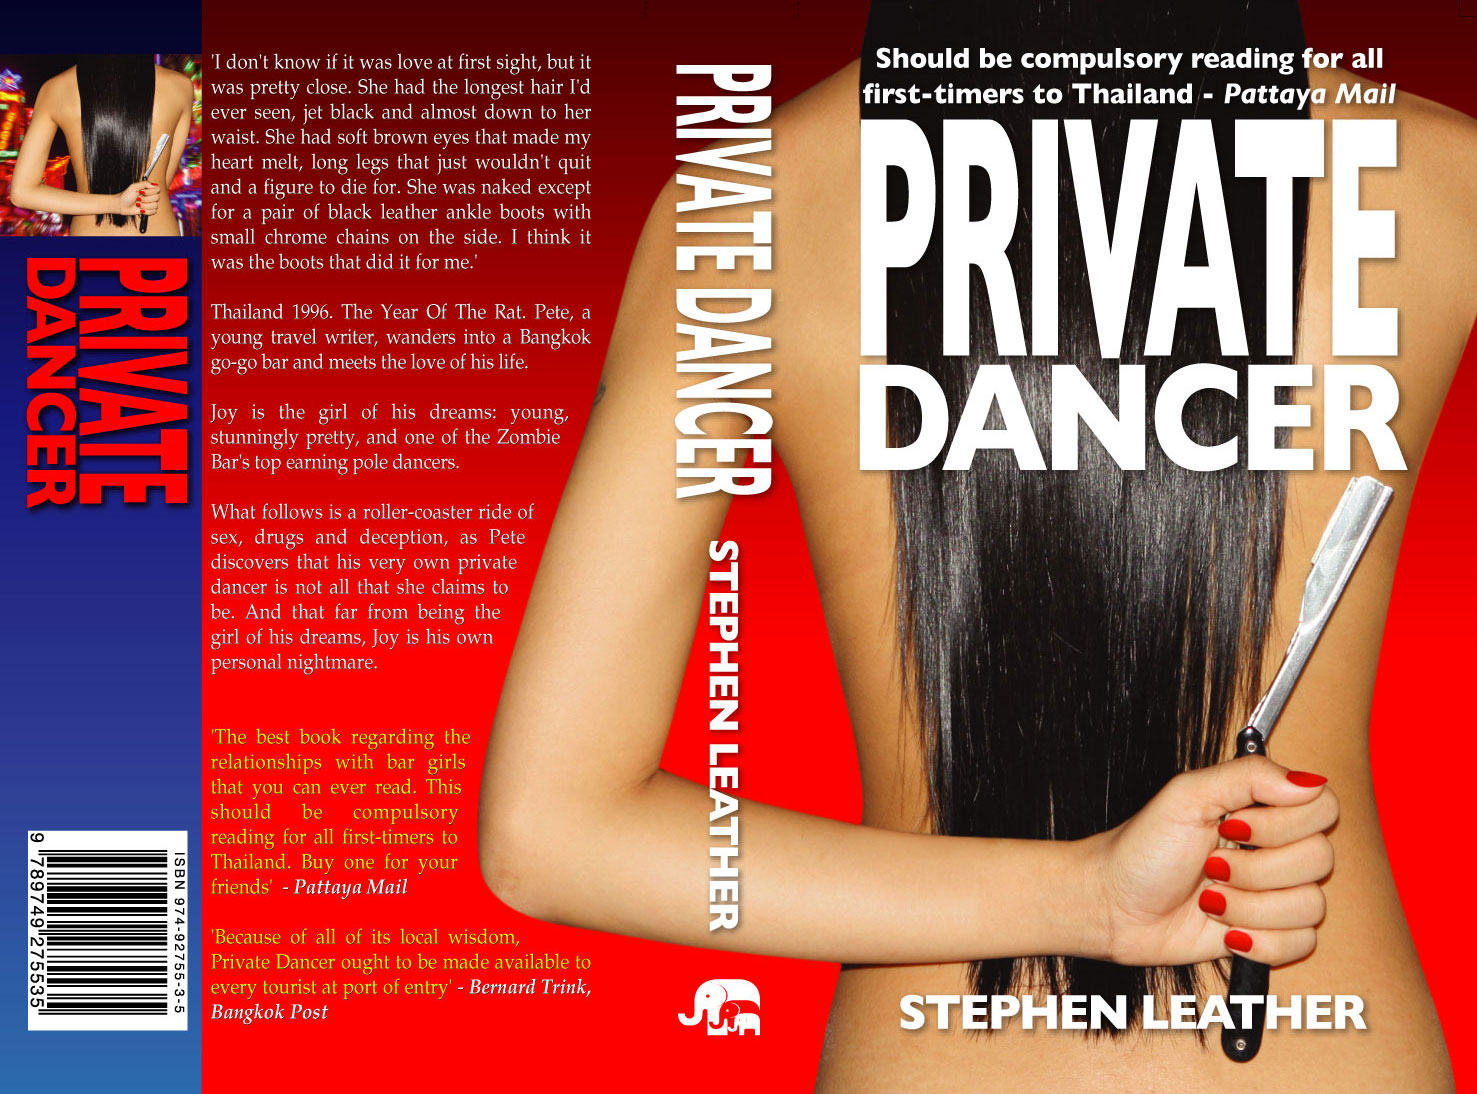 Cover of private dancer book in Thailand